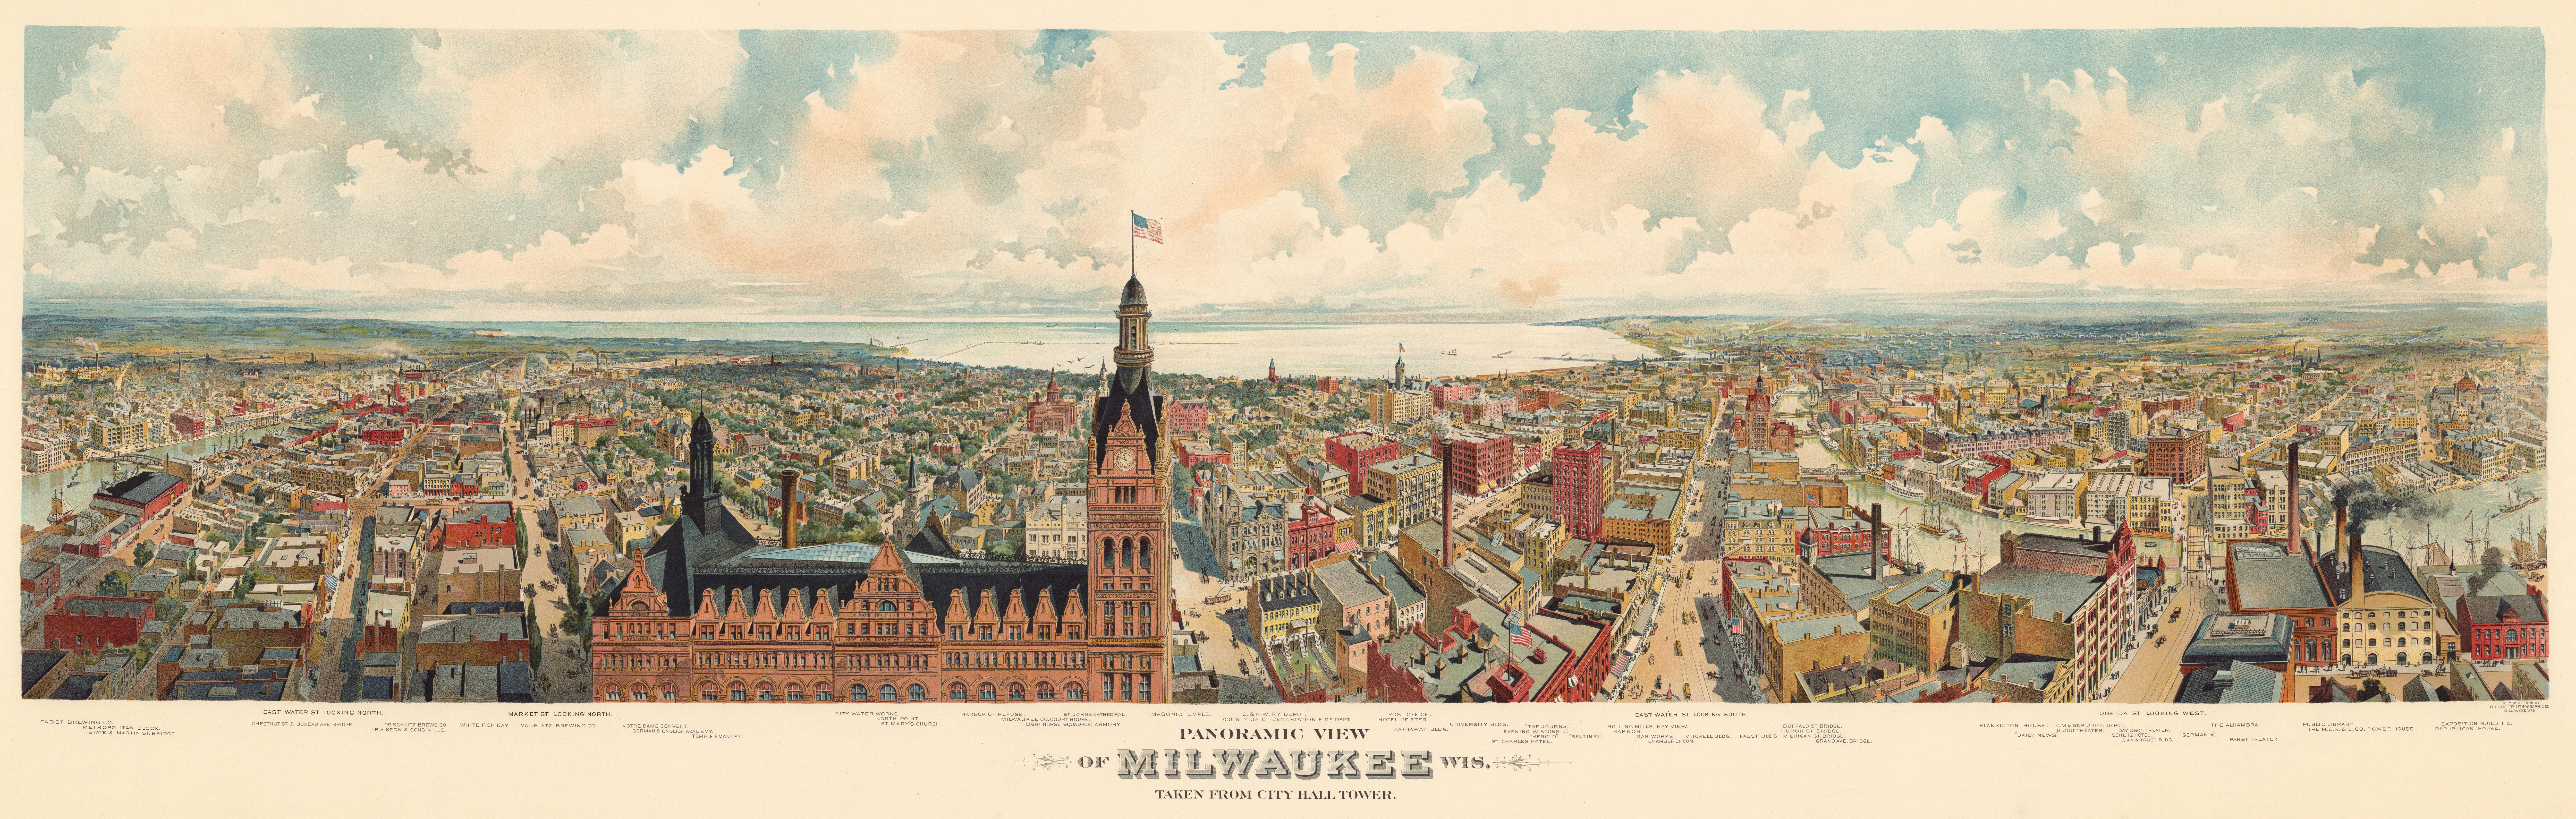 Panoramic view of Milwaukee, Wis. : taken from City Hall tower. Copyright 1898 by the Gugler Lithographic Co., Milwaukee, Wis.